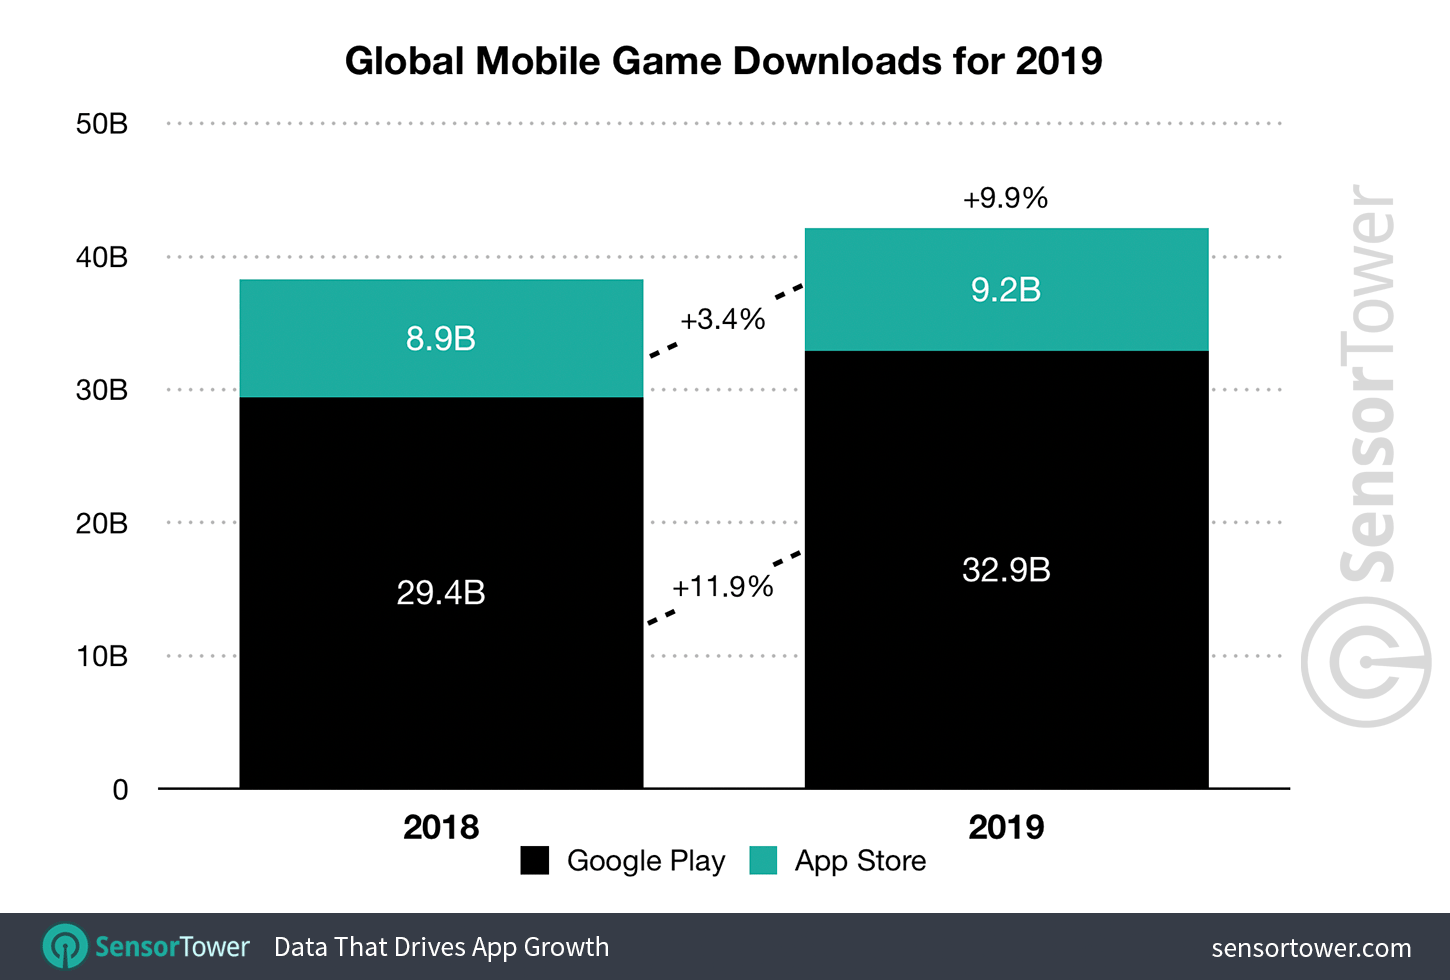 2019 Mobile Game Downloads